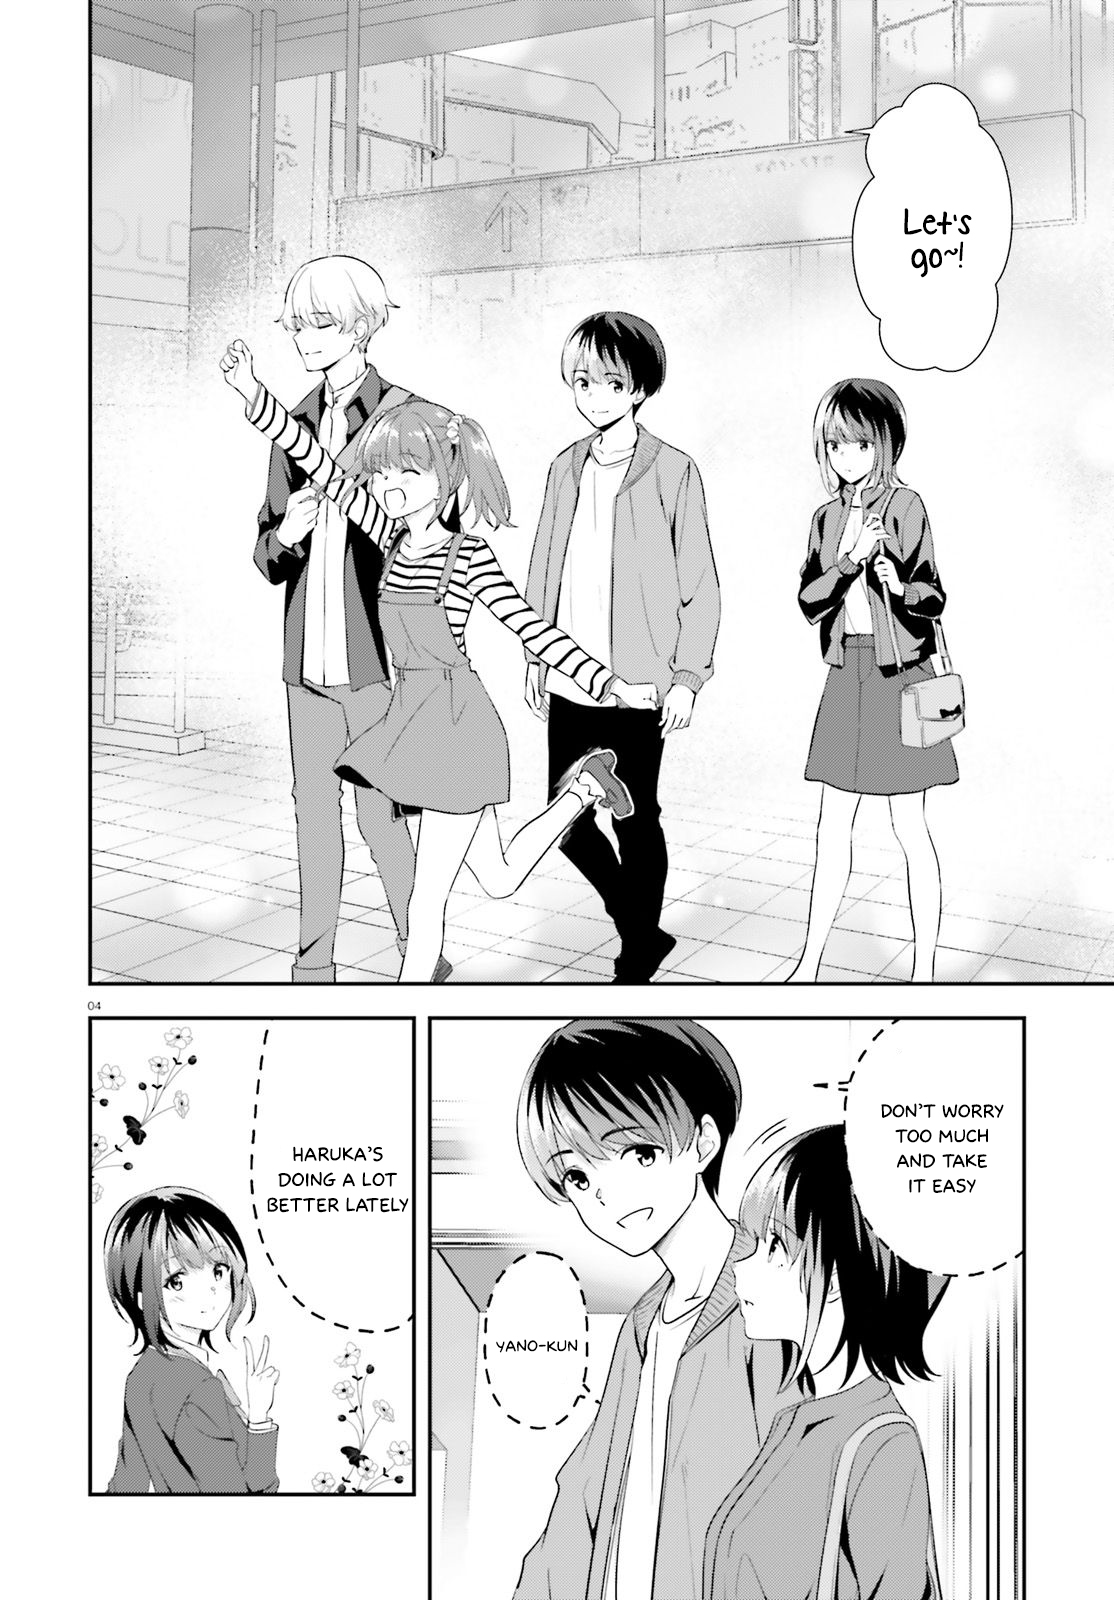 Bizarre Love Triangle Vol. 2 Ch. 10 The Weekend Together